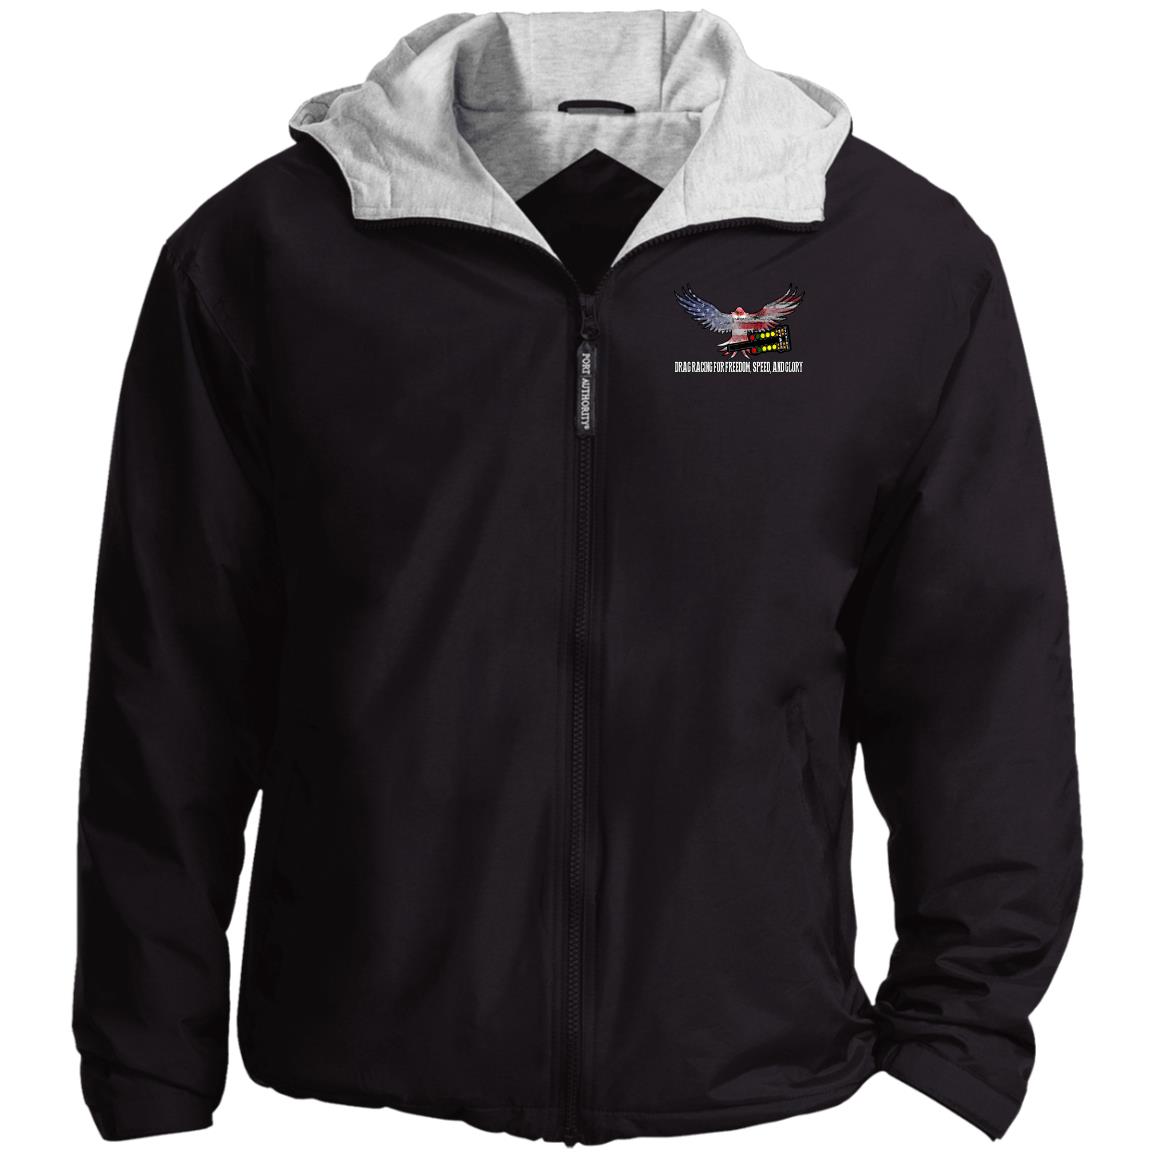 Drag Racing for Freedom, Speed, and Glory Team Jacket